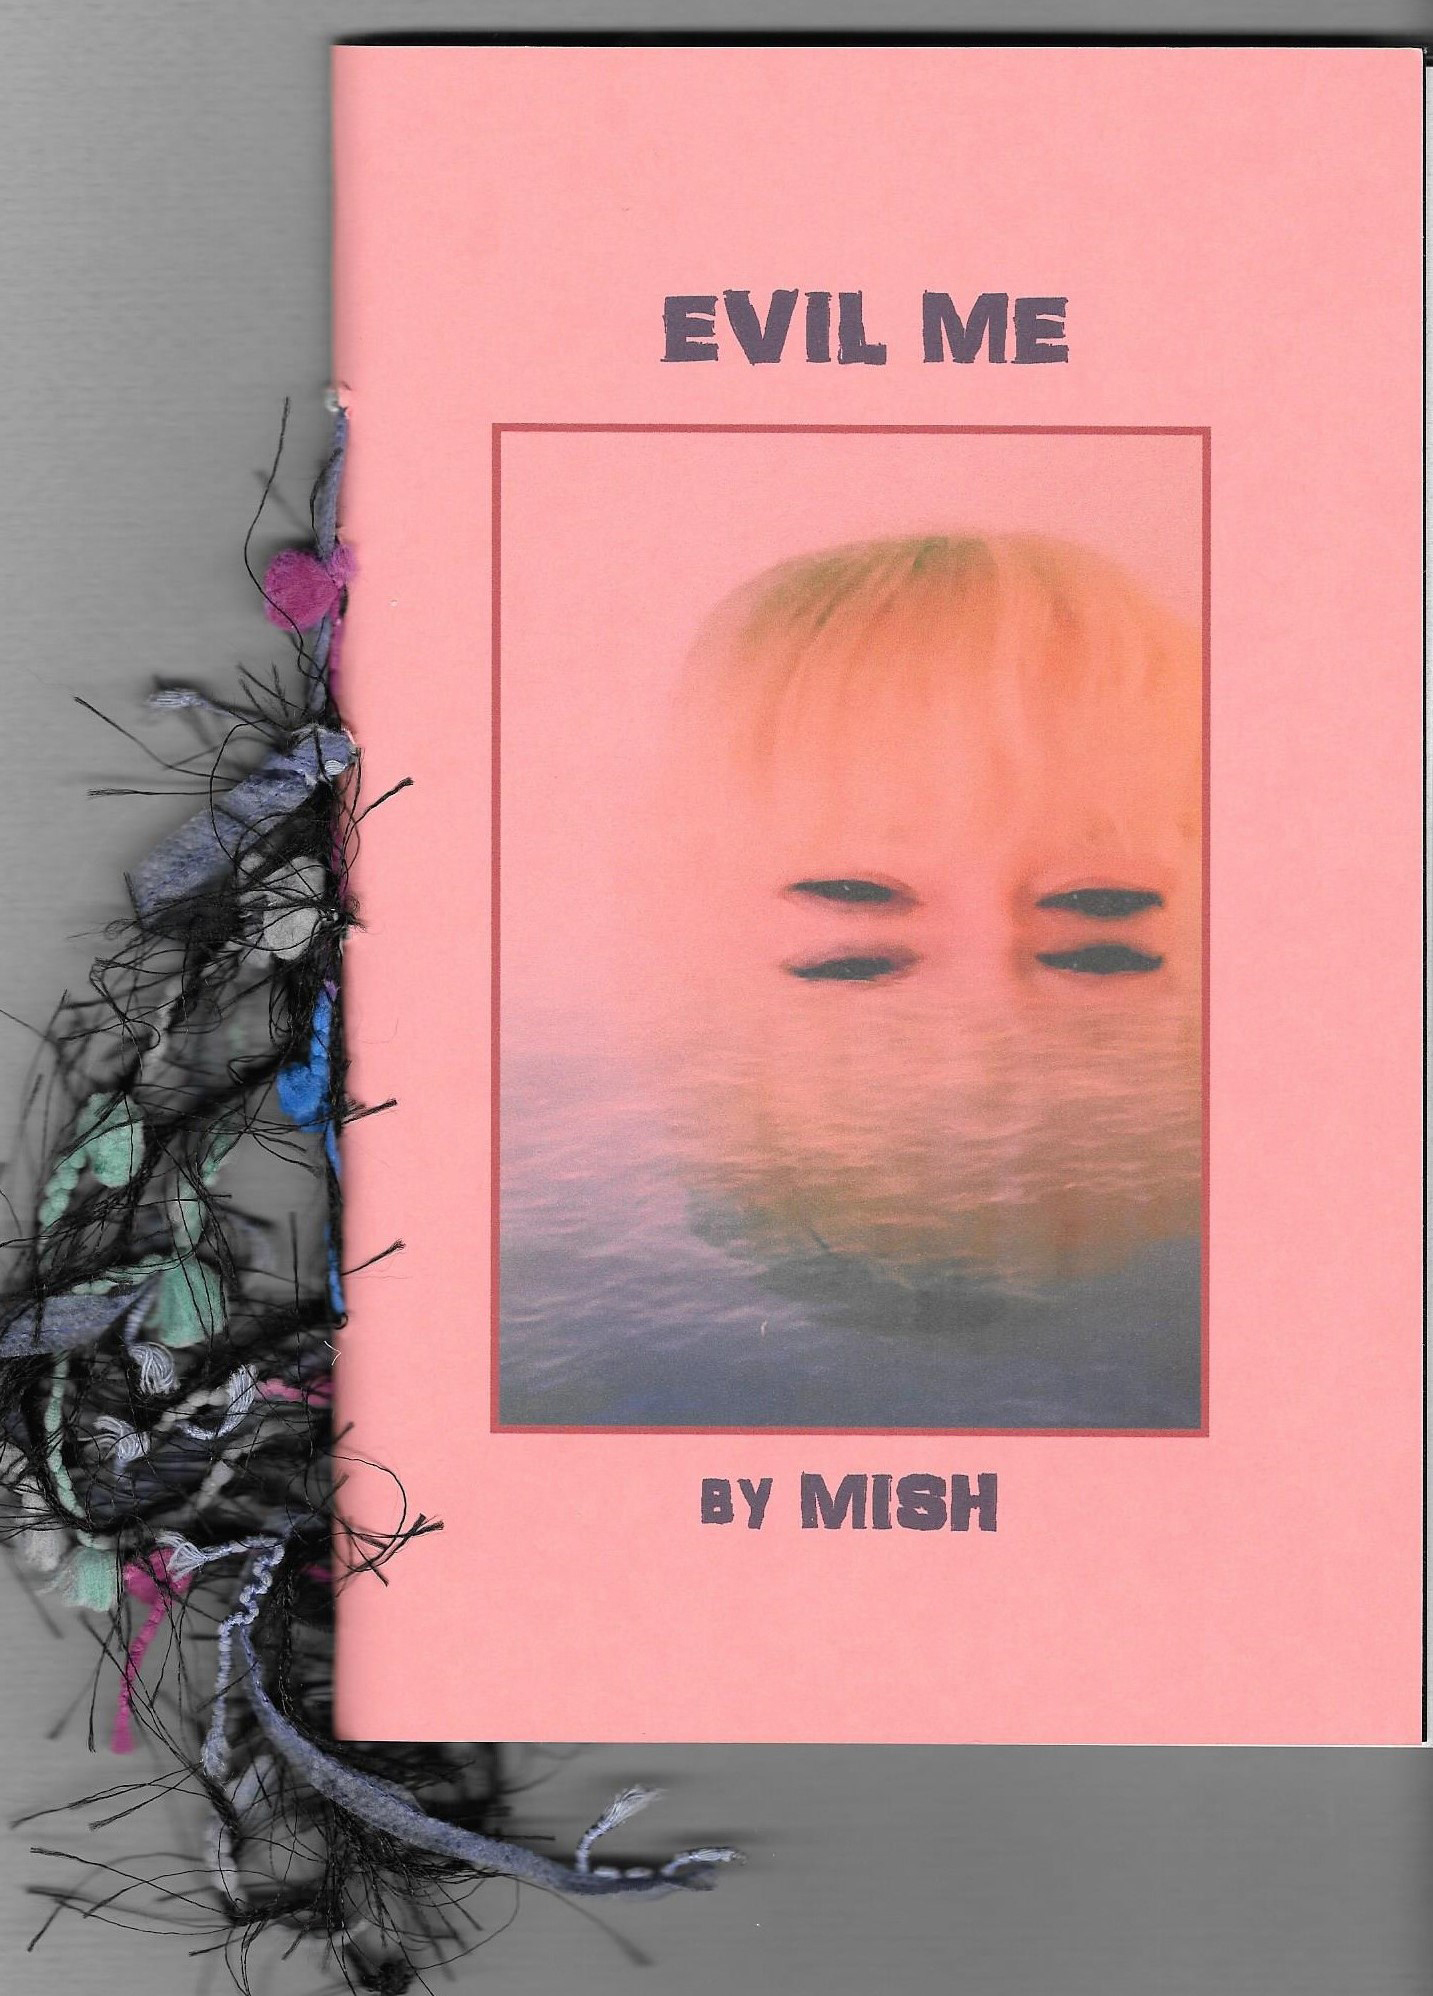 Cover of Evil Me, a chapbook by Mish, is salmon colored background and image of a woman's face underwater up to her eyes; the reflectionin the waterz makes it look like she has 4 eyes